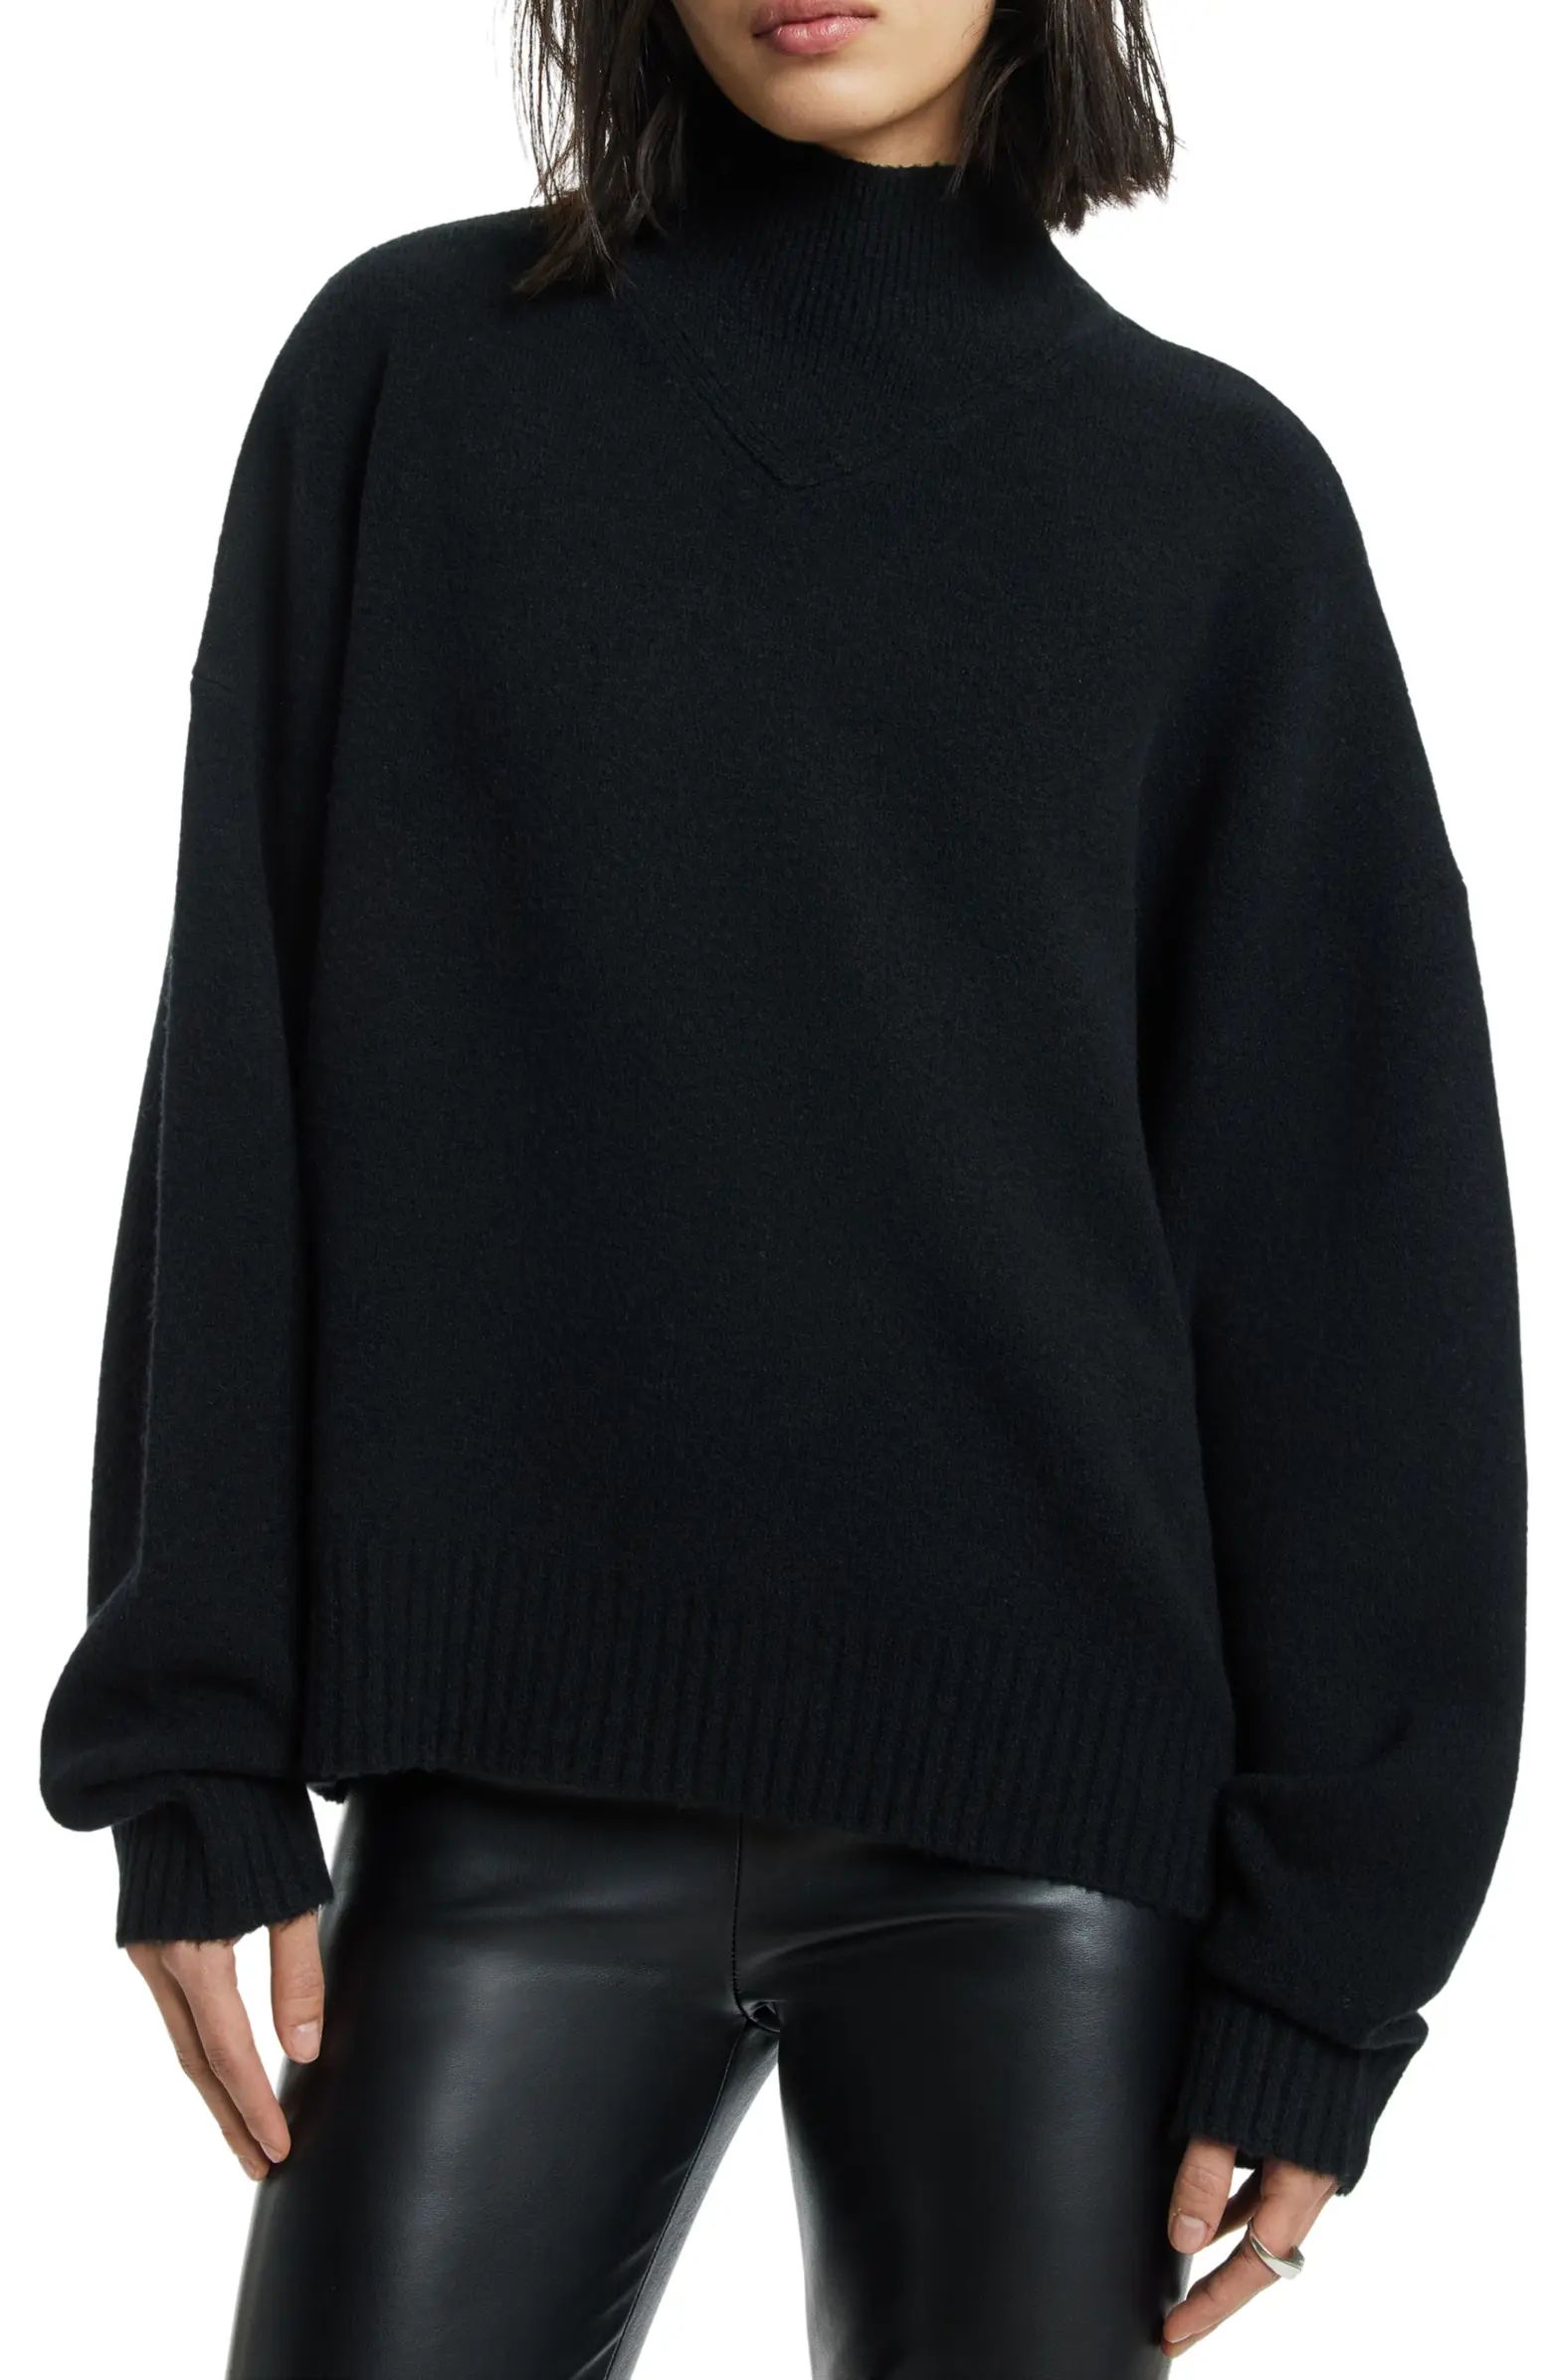 A Star Cashmere & Wool SweaterALLSAINTS | Nordstrom